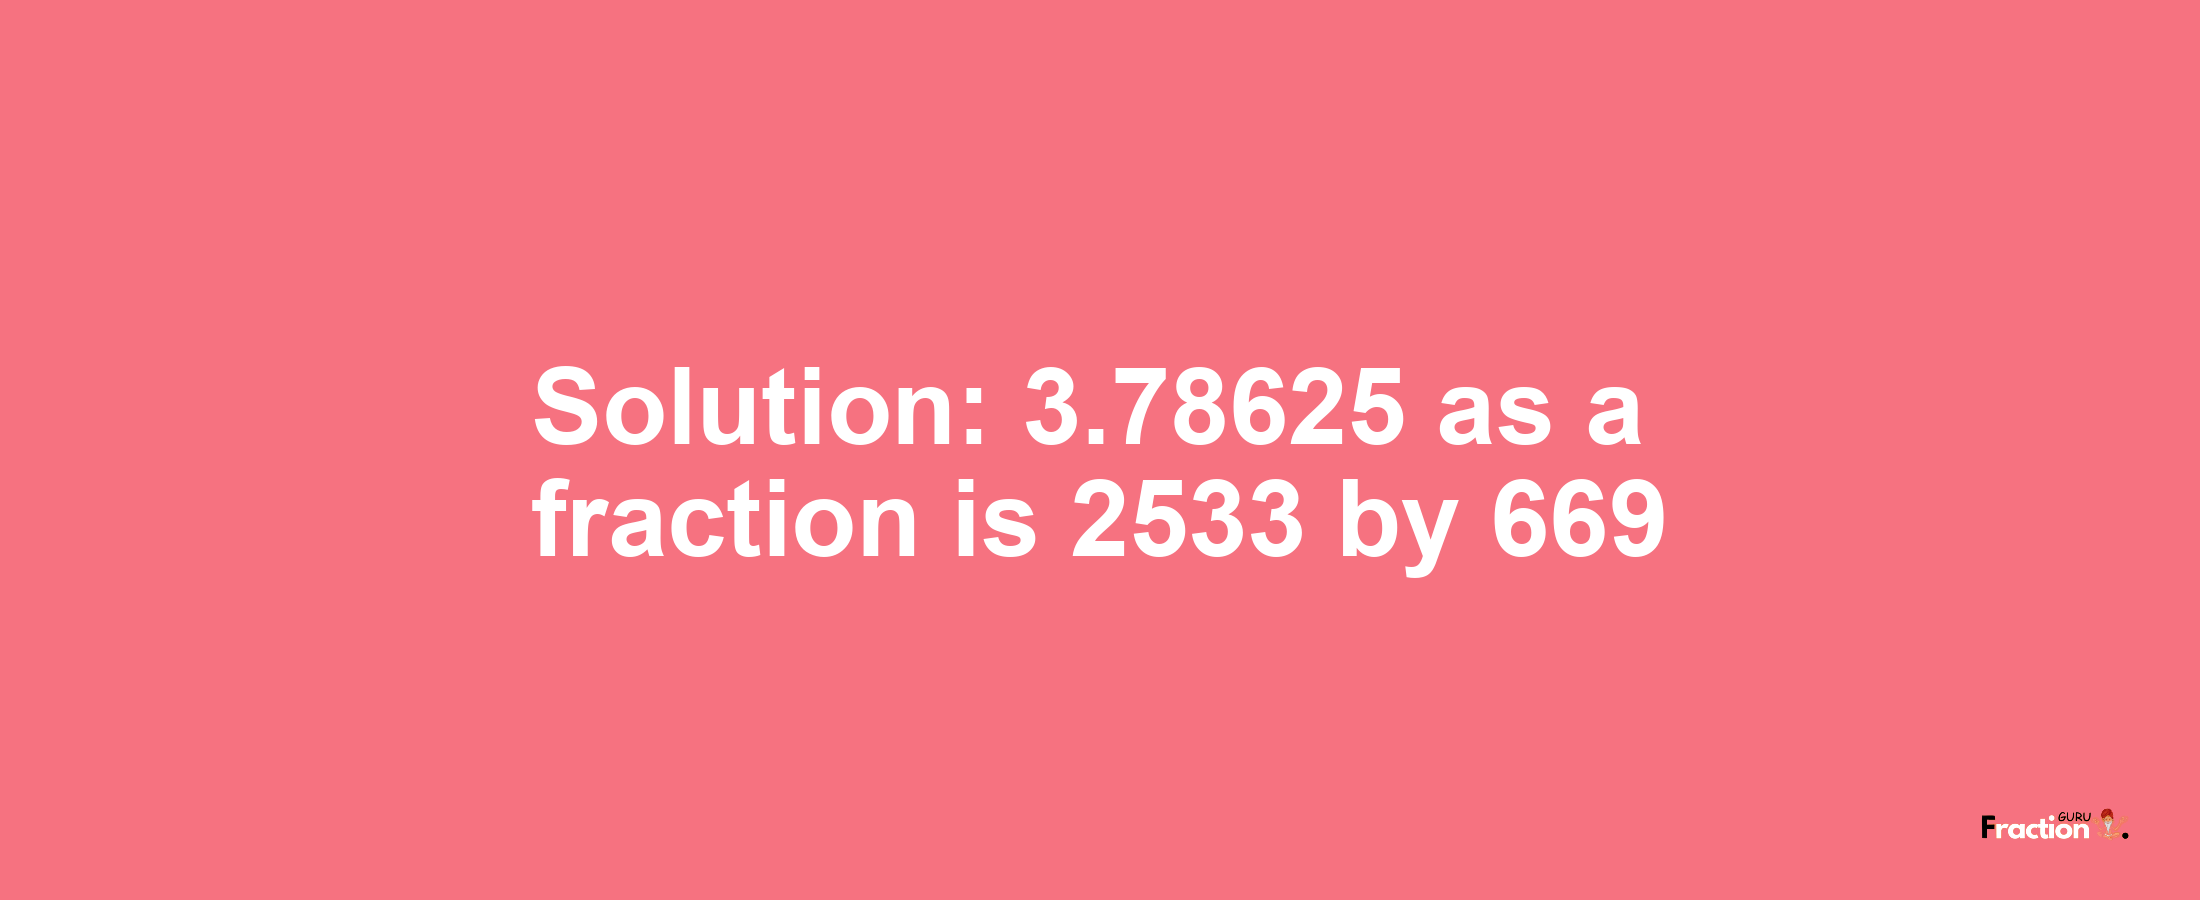 Solution:3.78625 as a fraction is 2533/669